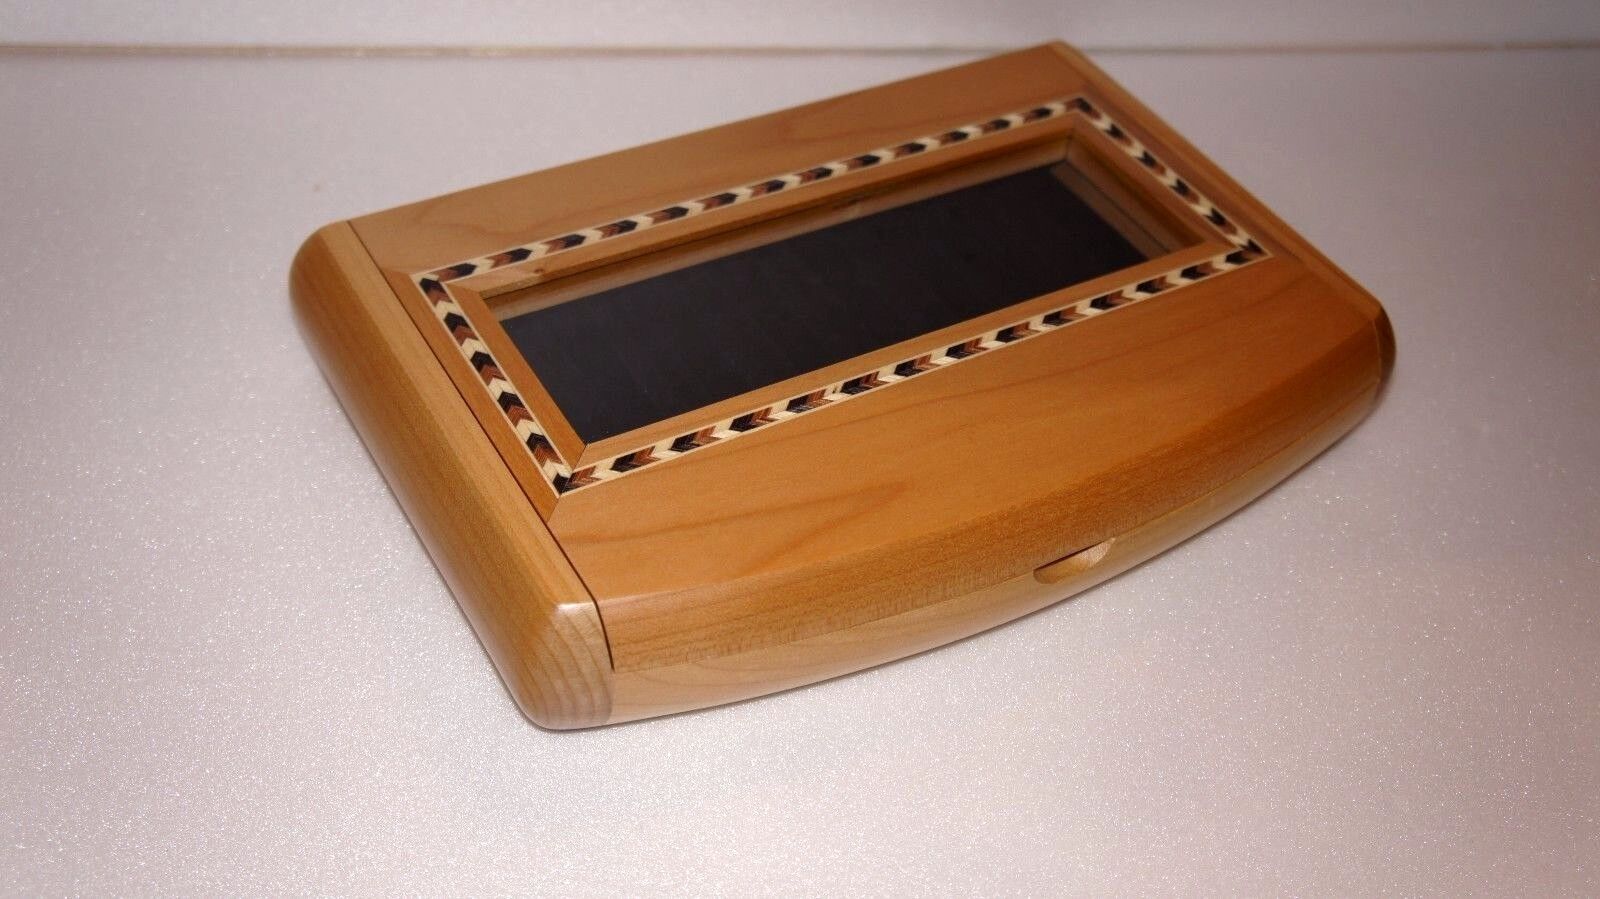 Solid Maple Wooden Display Box Pen Case Great Gift for Engraving